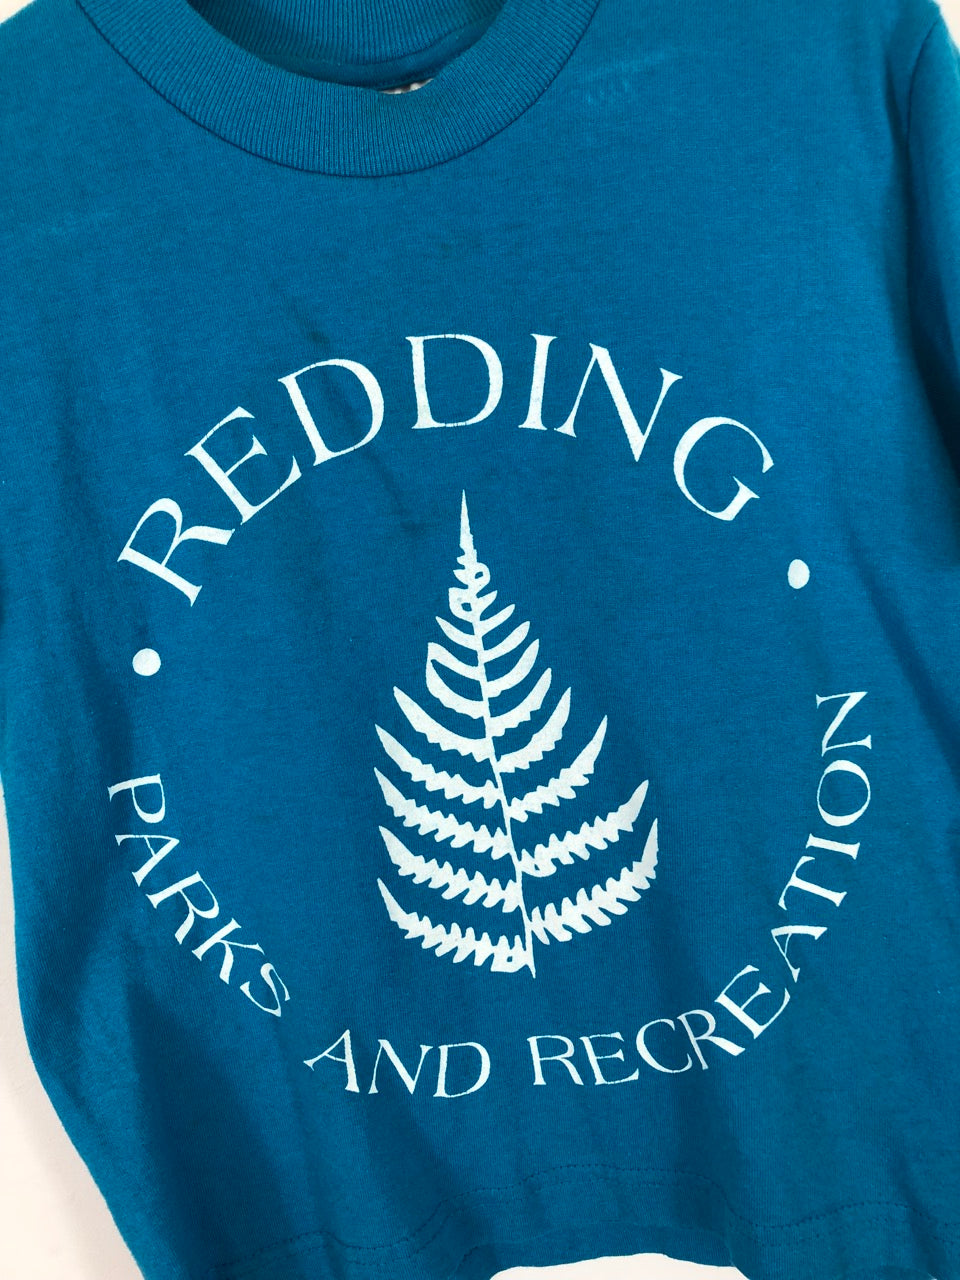 Kids' Redding Parks and Recreation T-Shirt